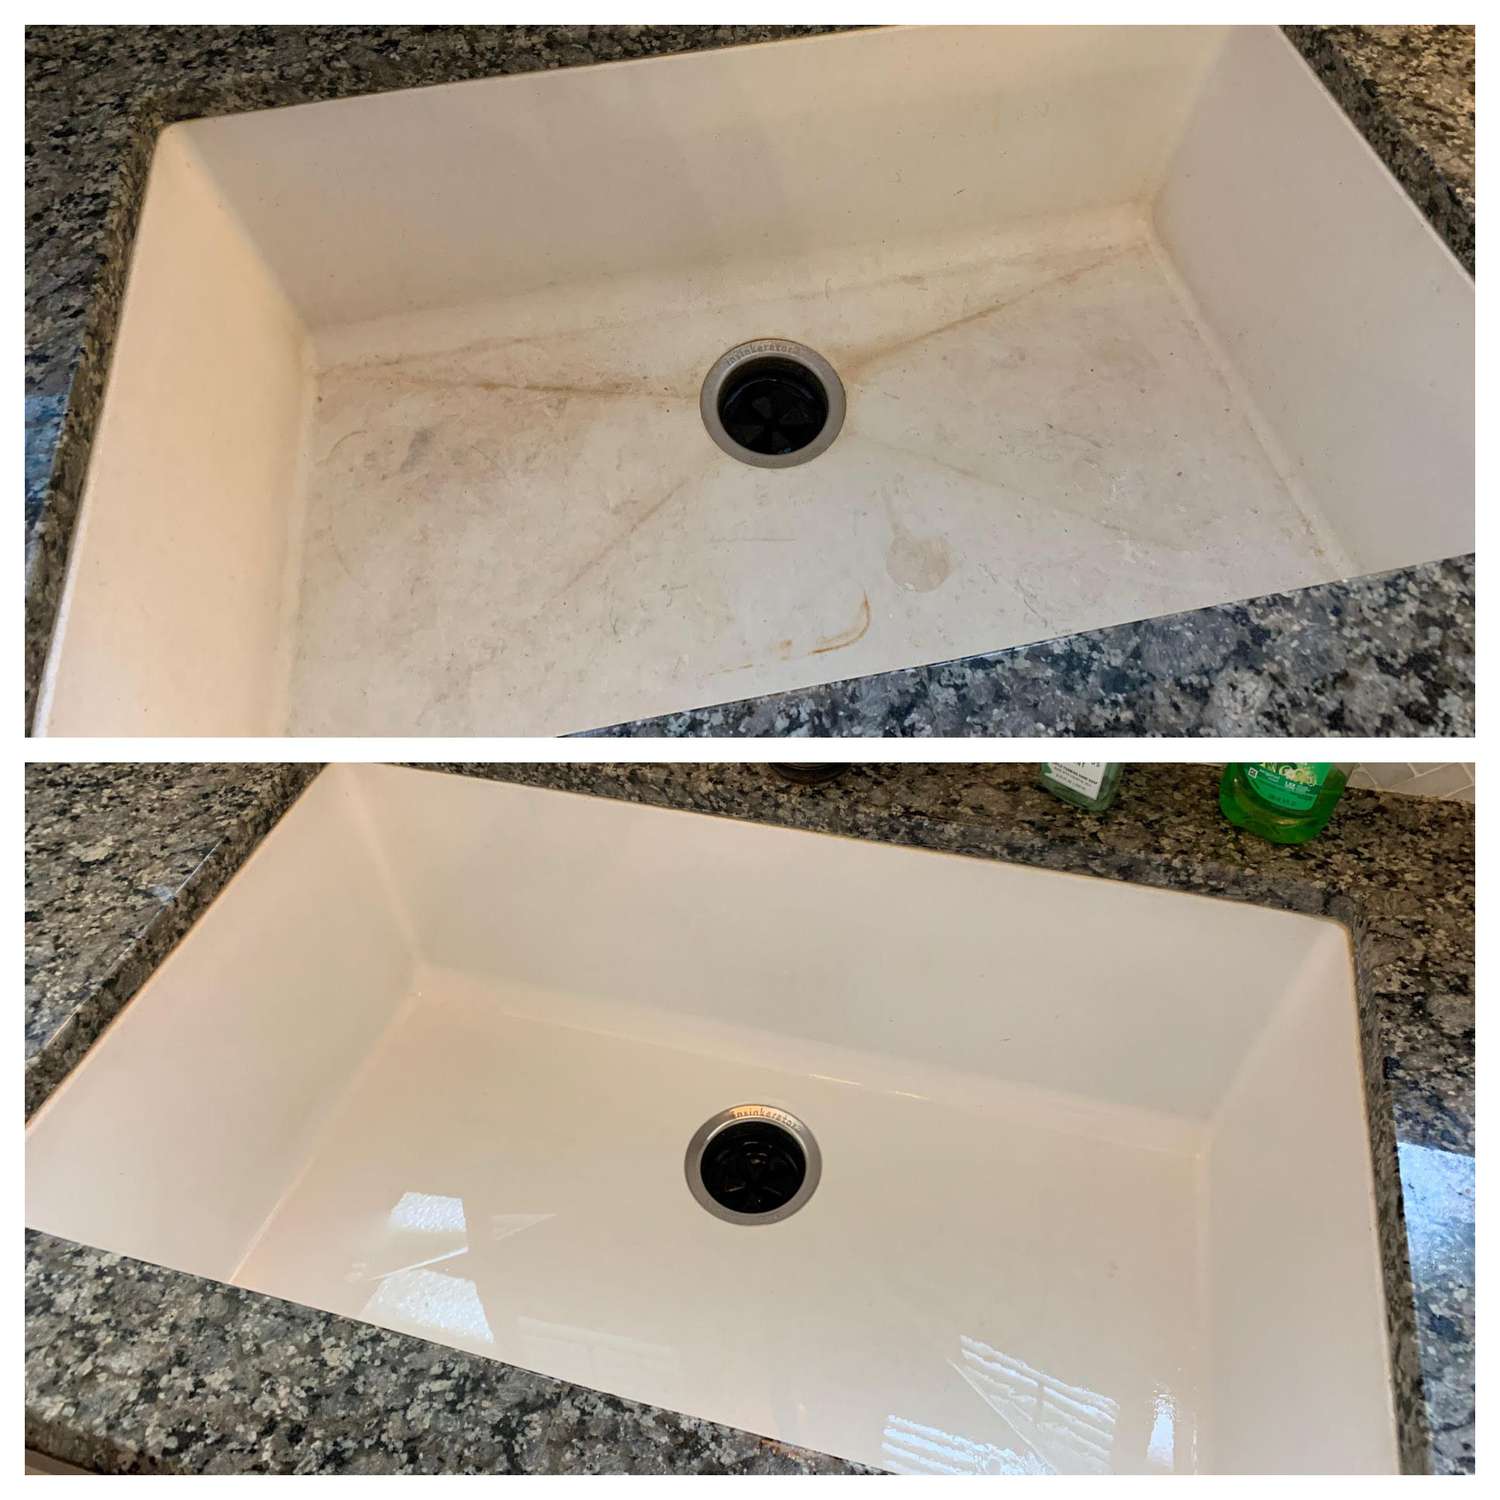 Dirty Sink Before and After